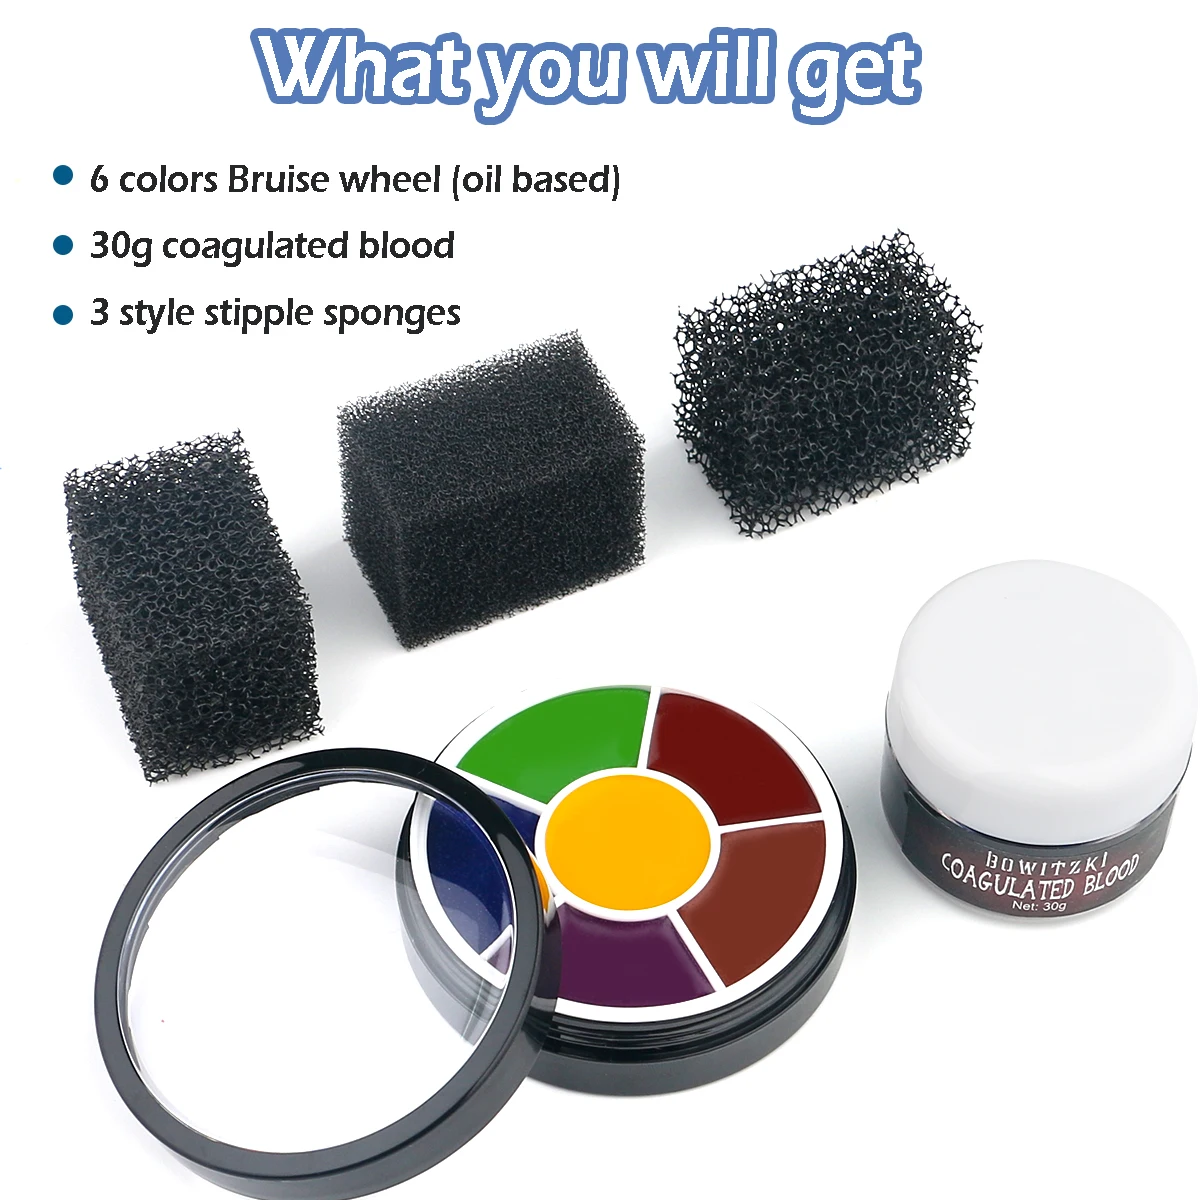 angivet Af storm Cyberplads Bowitzki SFX Starter Kit-6 Color Bruise Wheel,3 Stipple Sponges,Stage  Blood,Perfect for Halloween Party Cosplay Stage Makeup _ - AliExpress Mobile